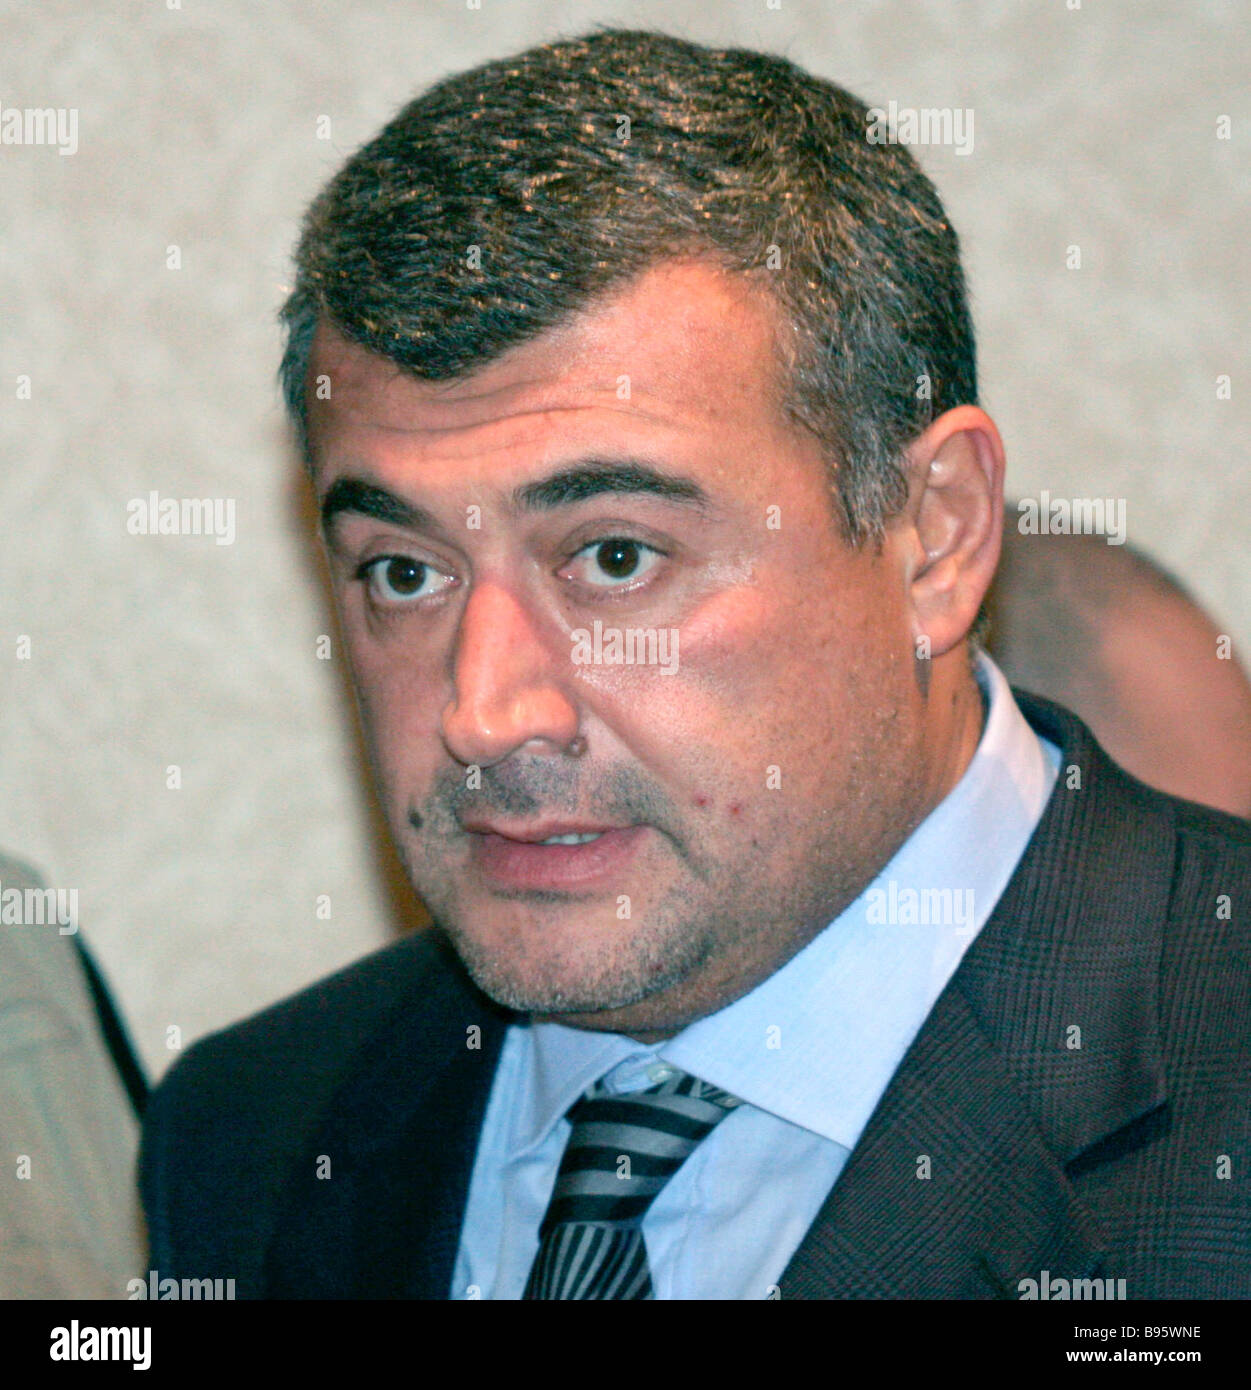 Download preview image - the-georgian-opposition-has-nominated-levan-gachechiladze-as-its-candidate-B95WNE